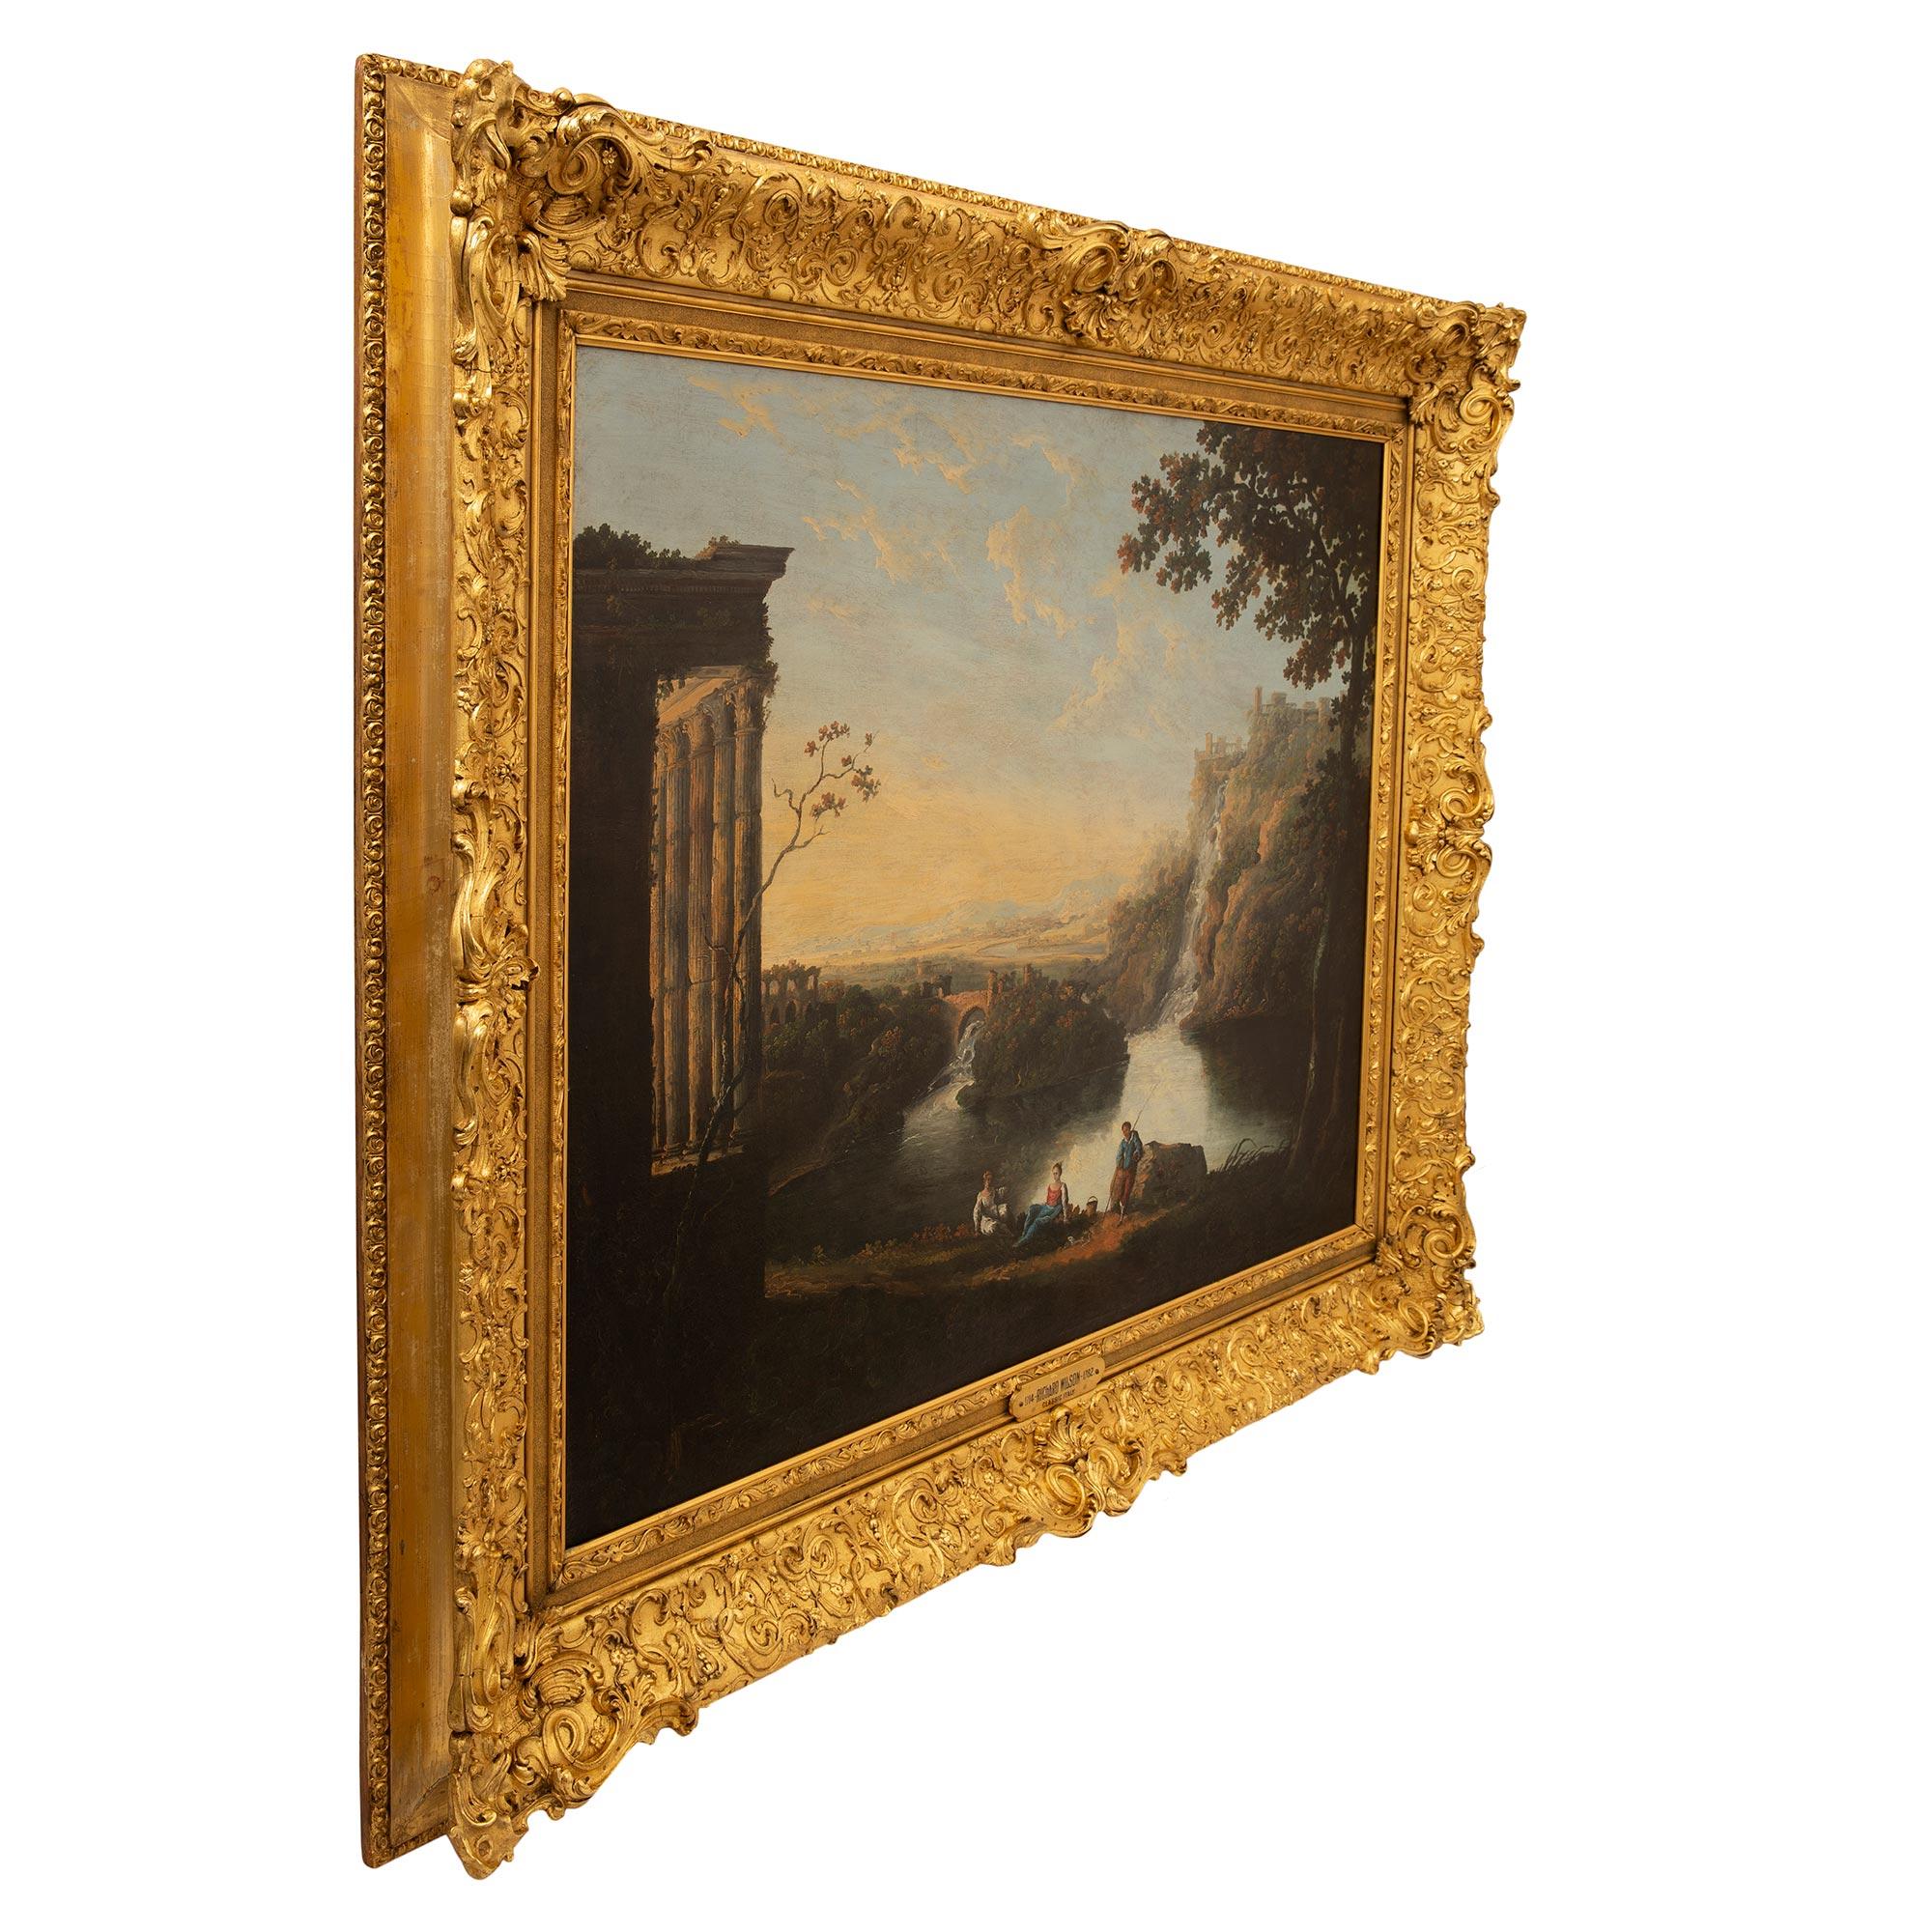 A magnificent Welsh 18th century oil on canvas painting by Richard Wilson. The painting is framed within a striking and richly carved giltwood border with fine foliate designs and intricately carved palmettes in a satin and burnished finish. The